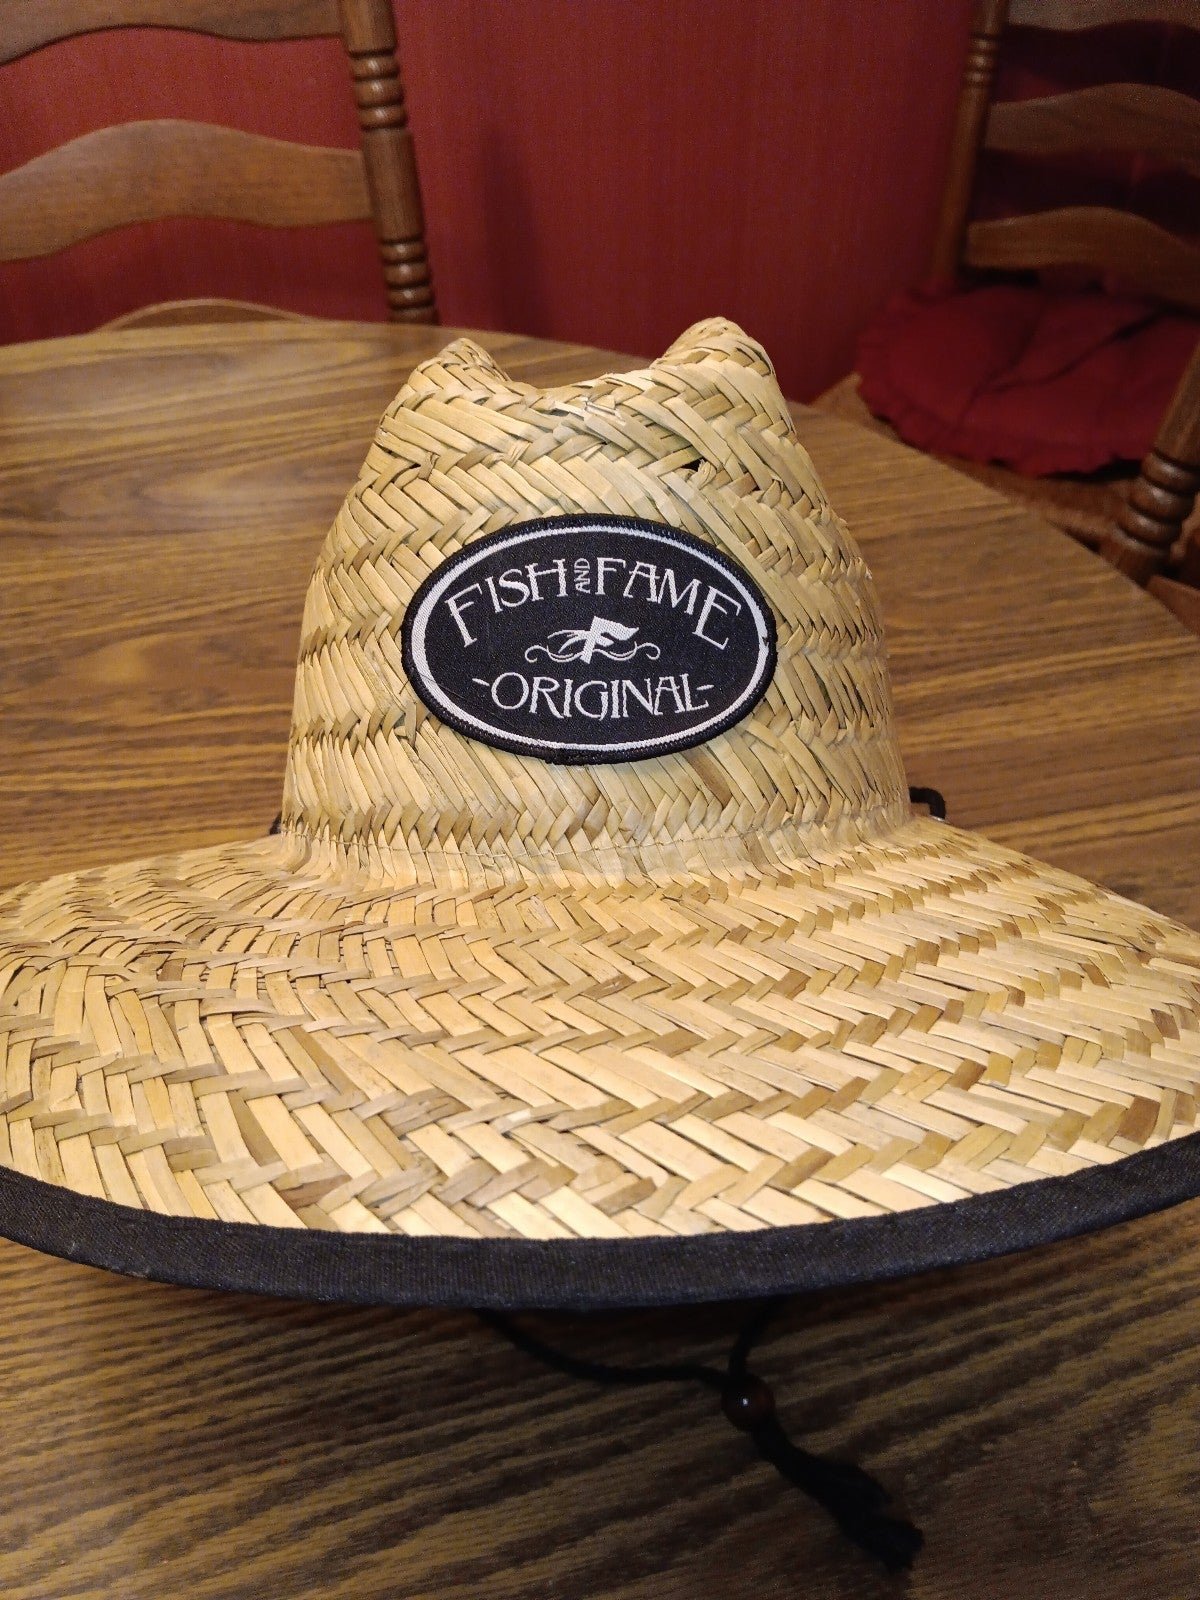 Fish and fame straw hat A86e7teCD